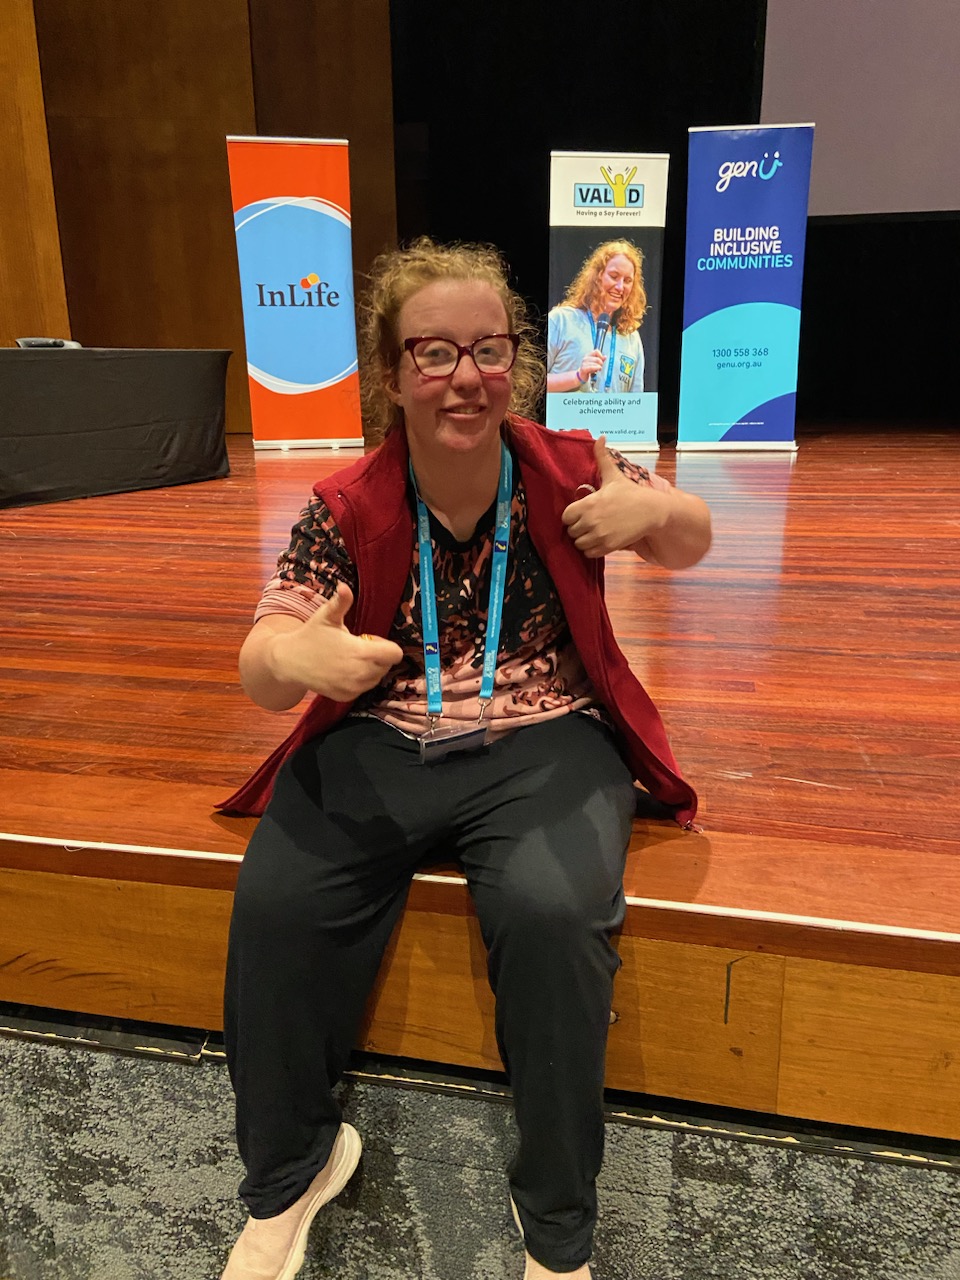 Jasmin sits on a stage at the VALID conference while smiling and holding two thumbs up